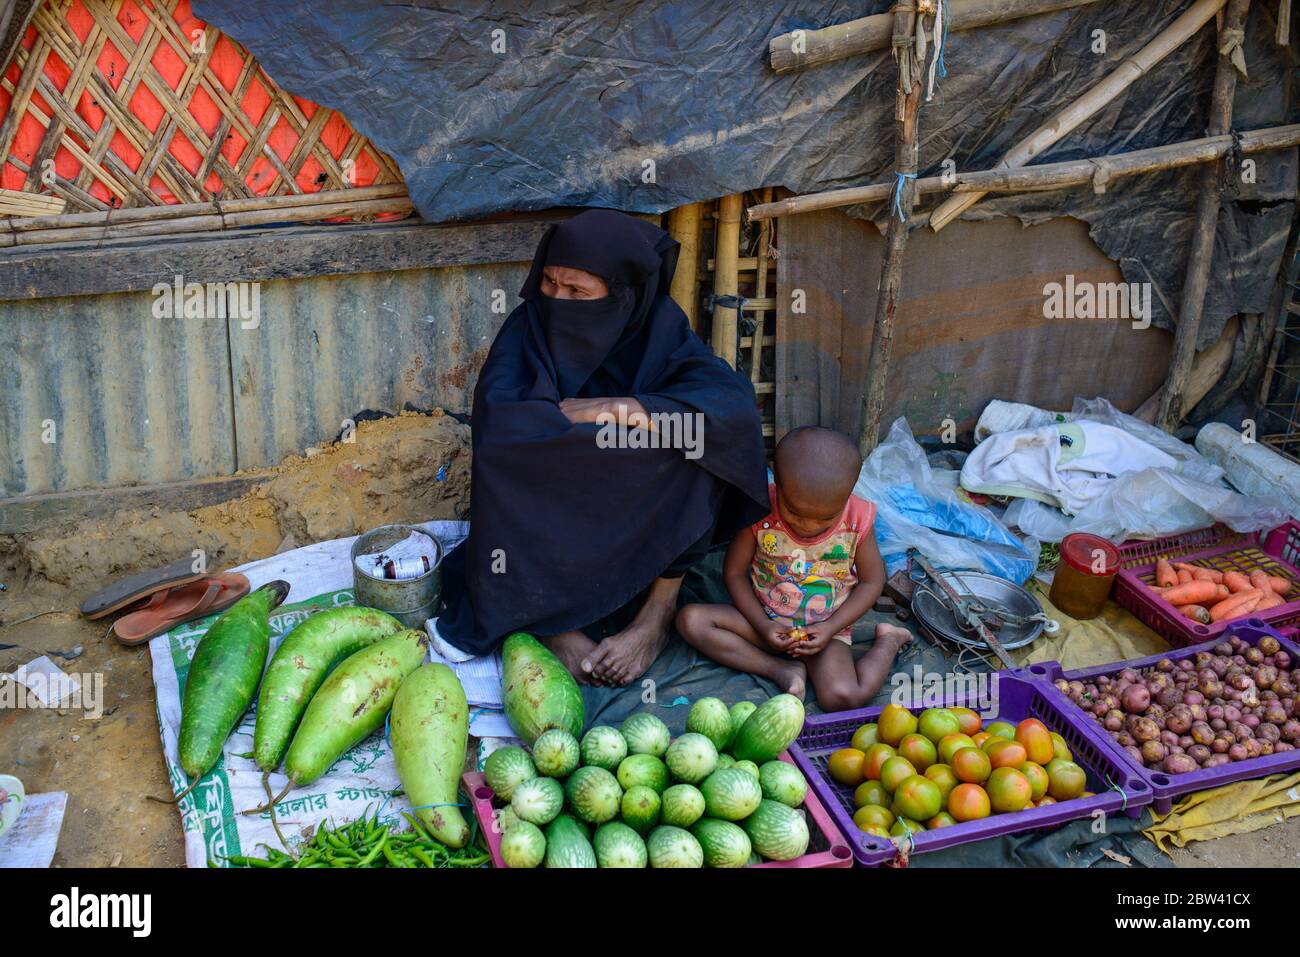 Kutupalong Refugee Camp, Coxs Bazar, Bangladesh - 08 February 2019: Living in one of the biggest refugee camps in the world. Refugees of the Rohinga m Stock Photo